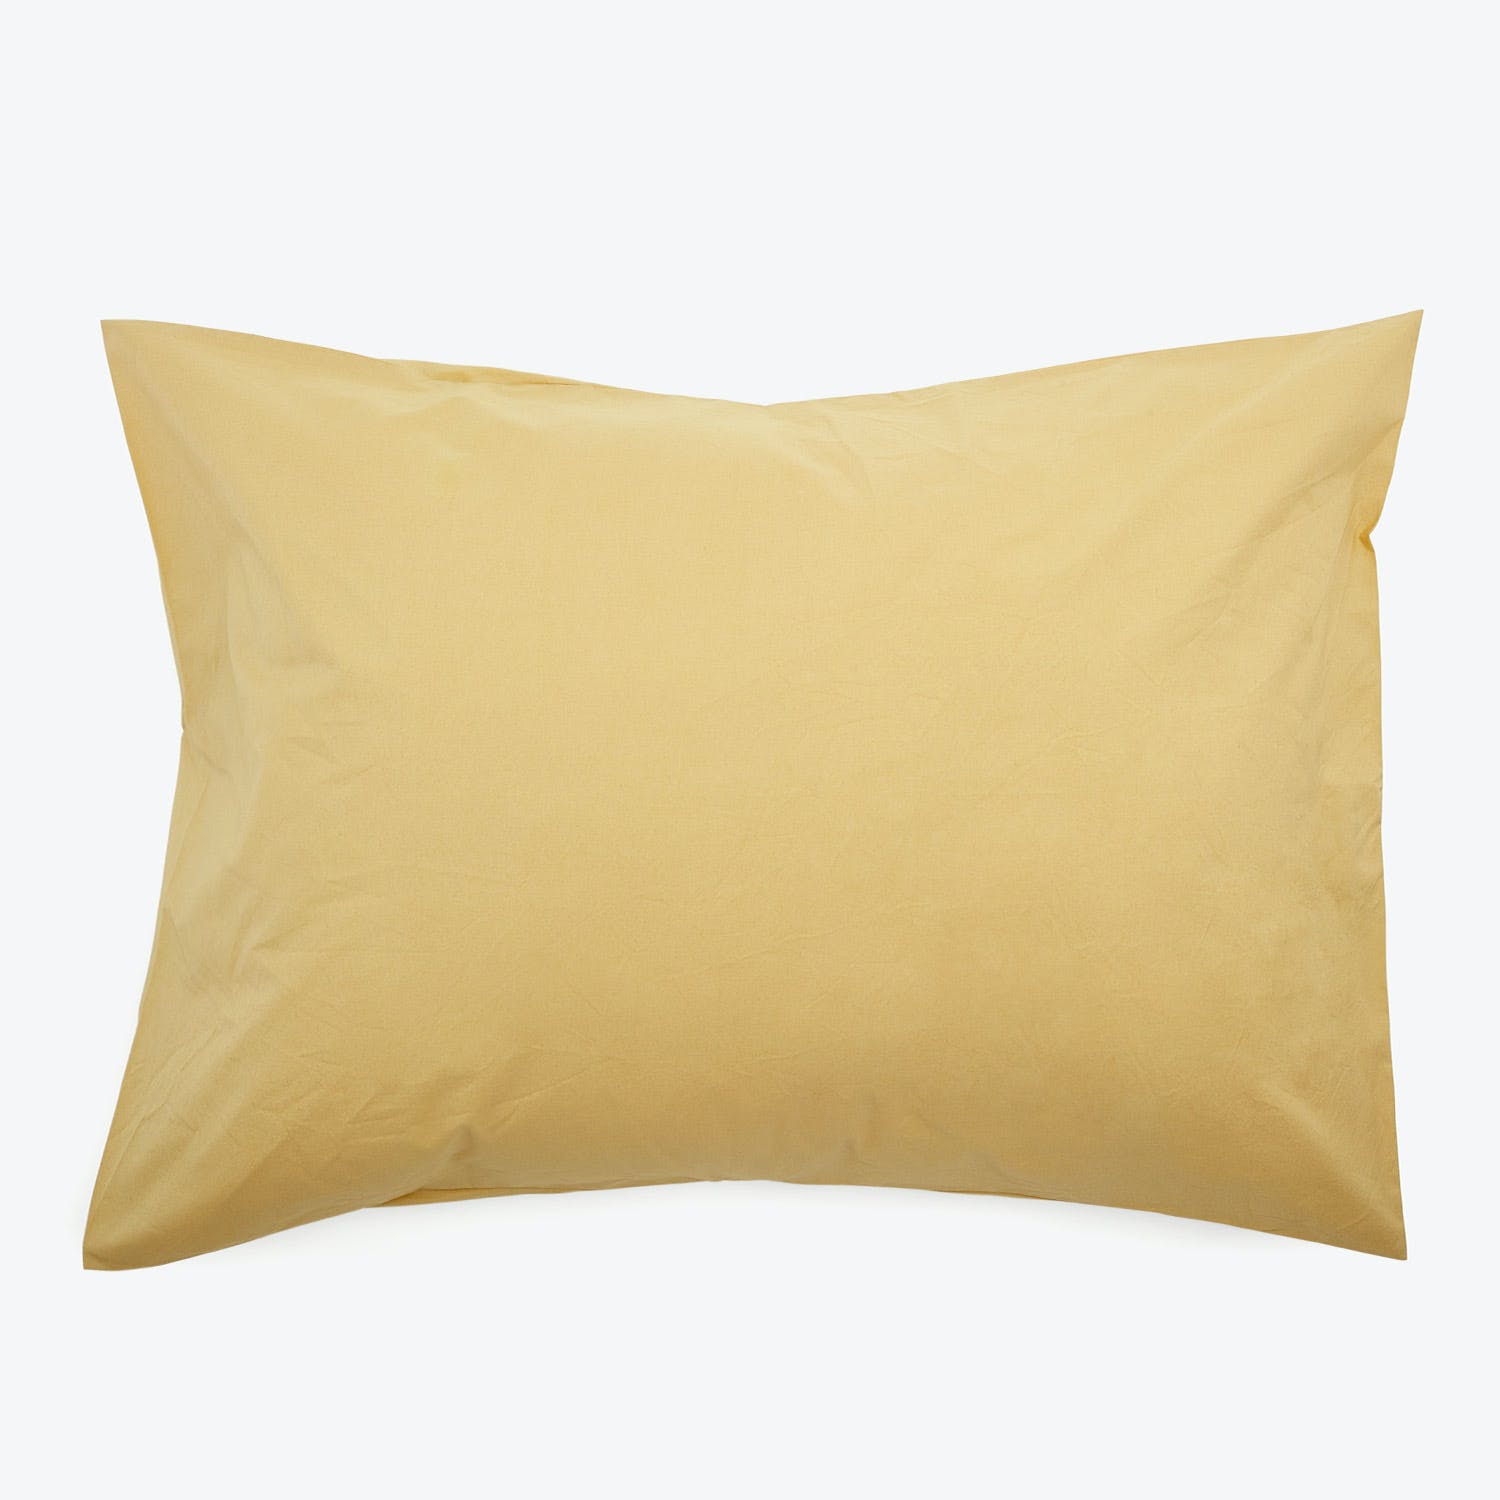 Plain yellow pillow with matching pillowcase, soft and fluffy.